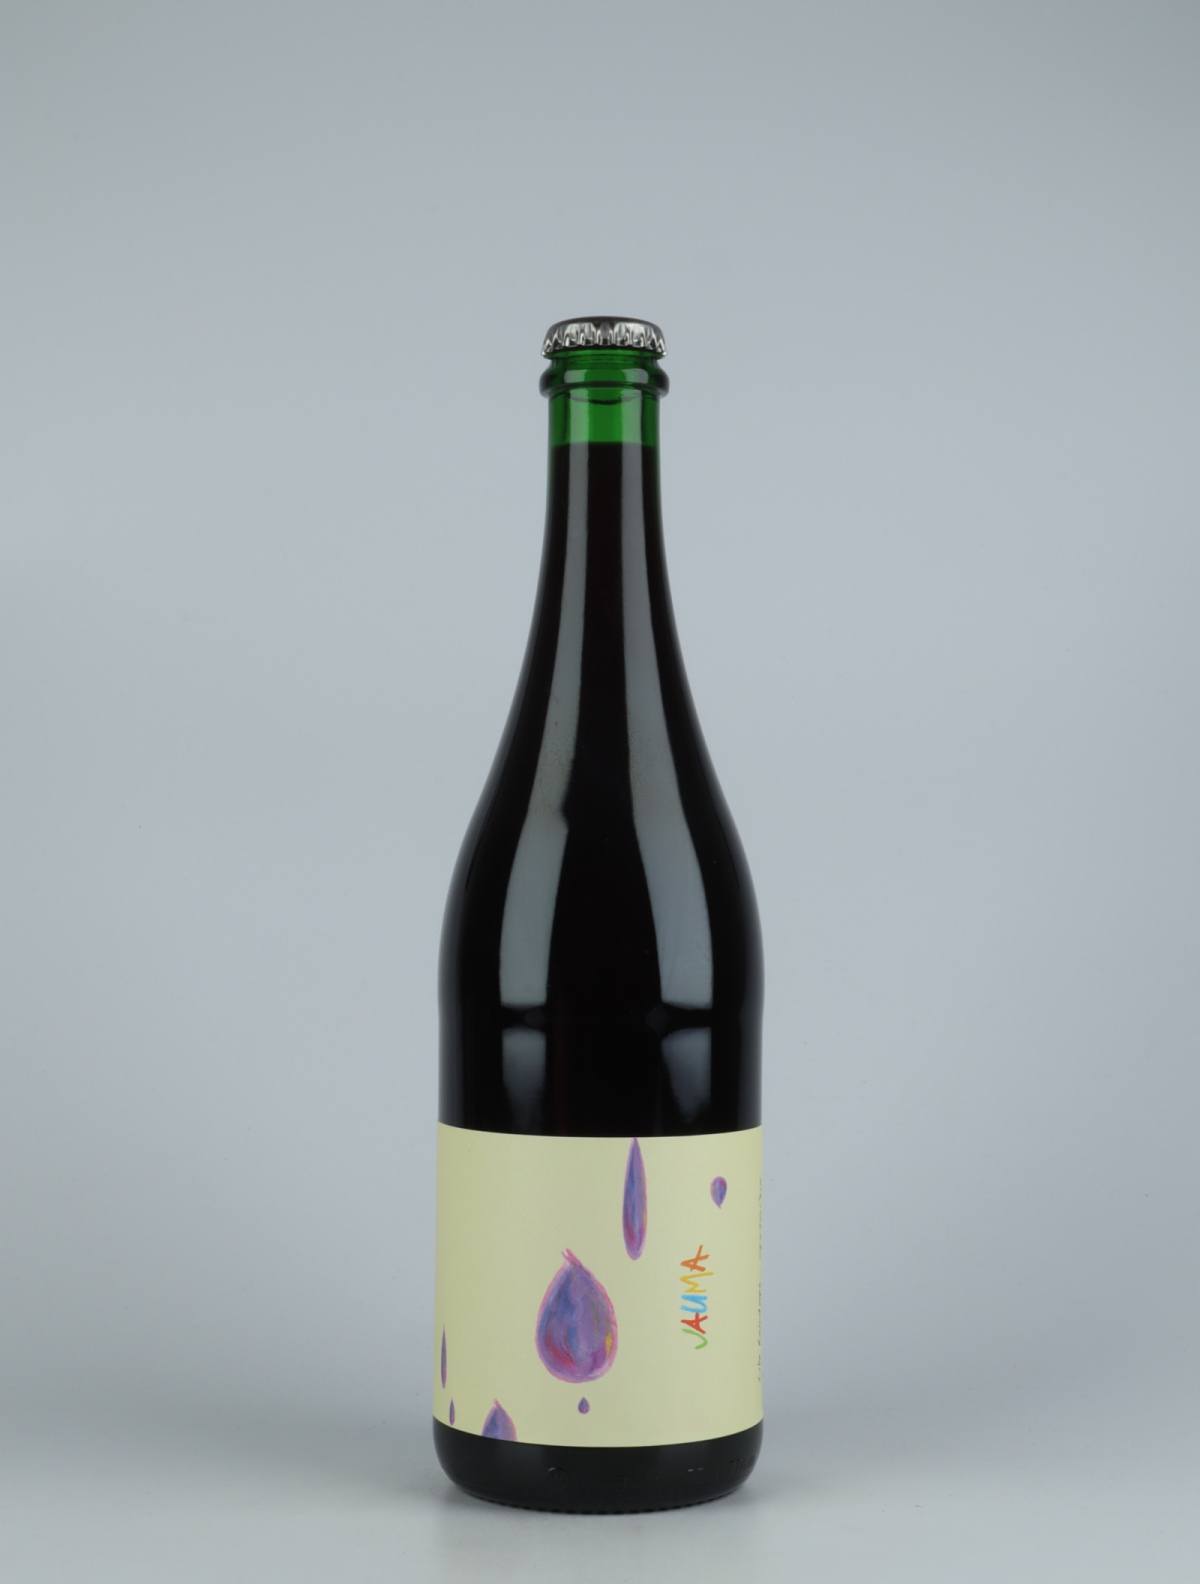 A bottle 2020 Like Raindrops Red wine from Jauma, Adelaide Hills in Australia